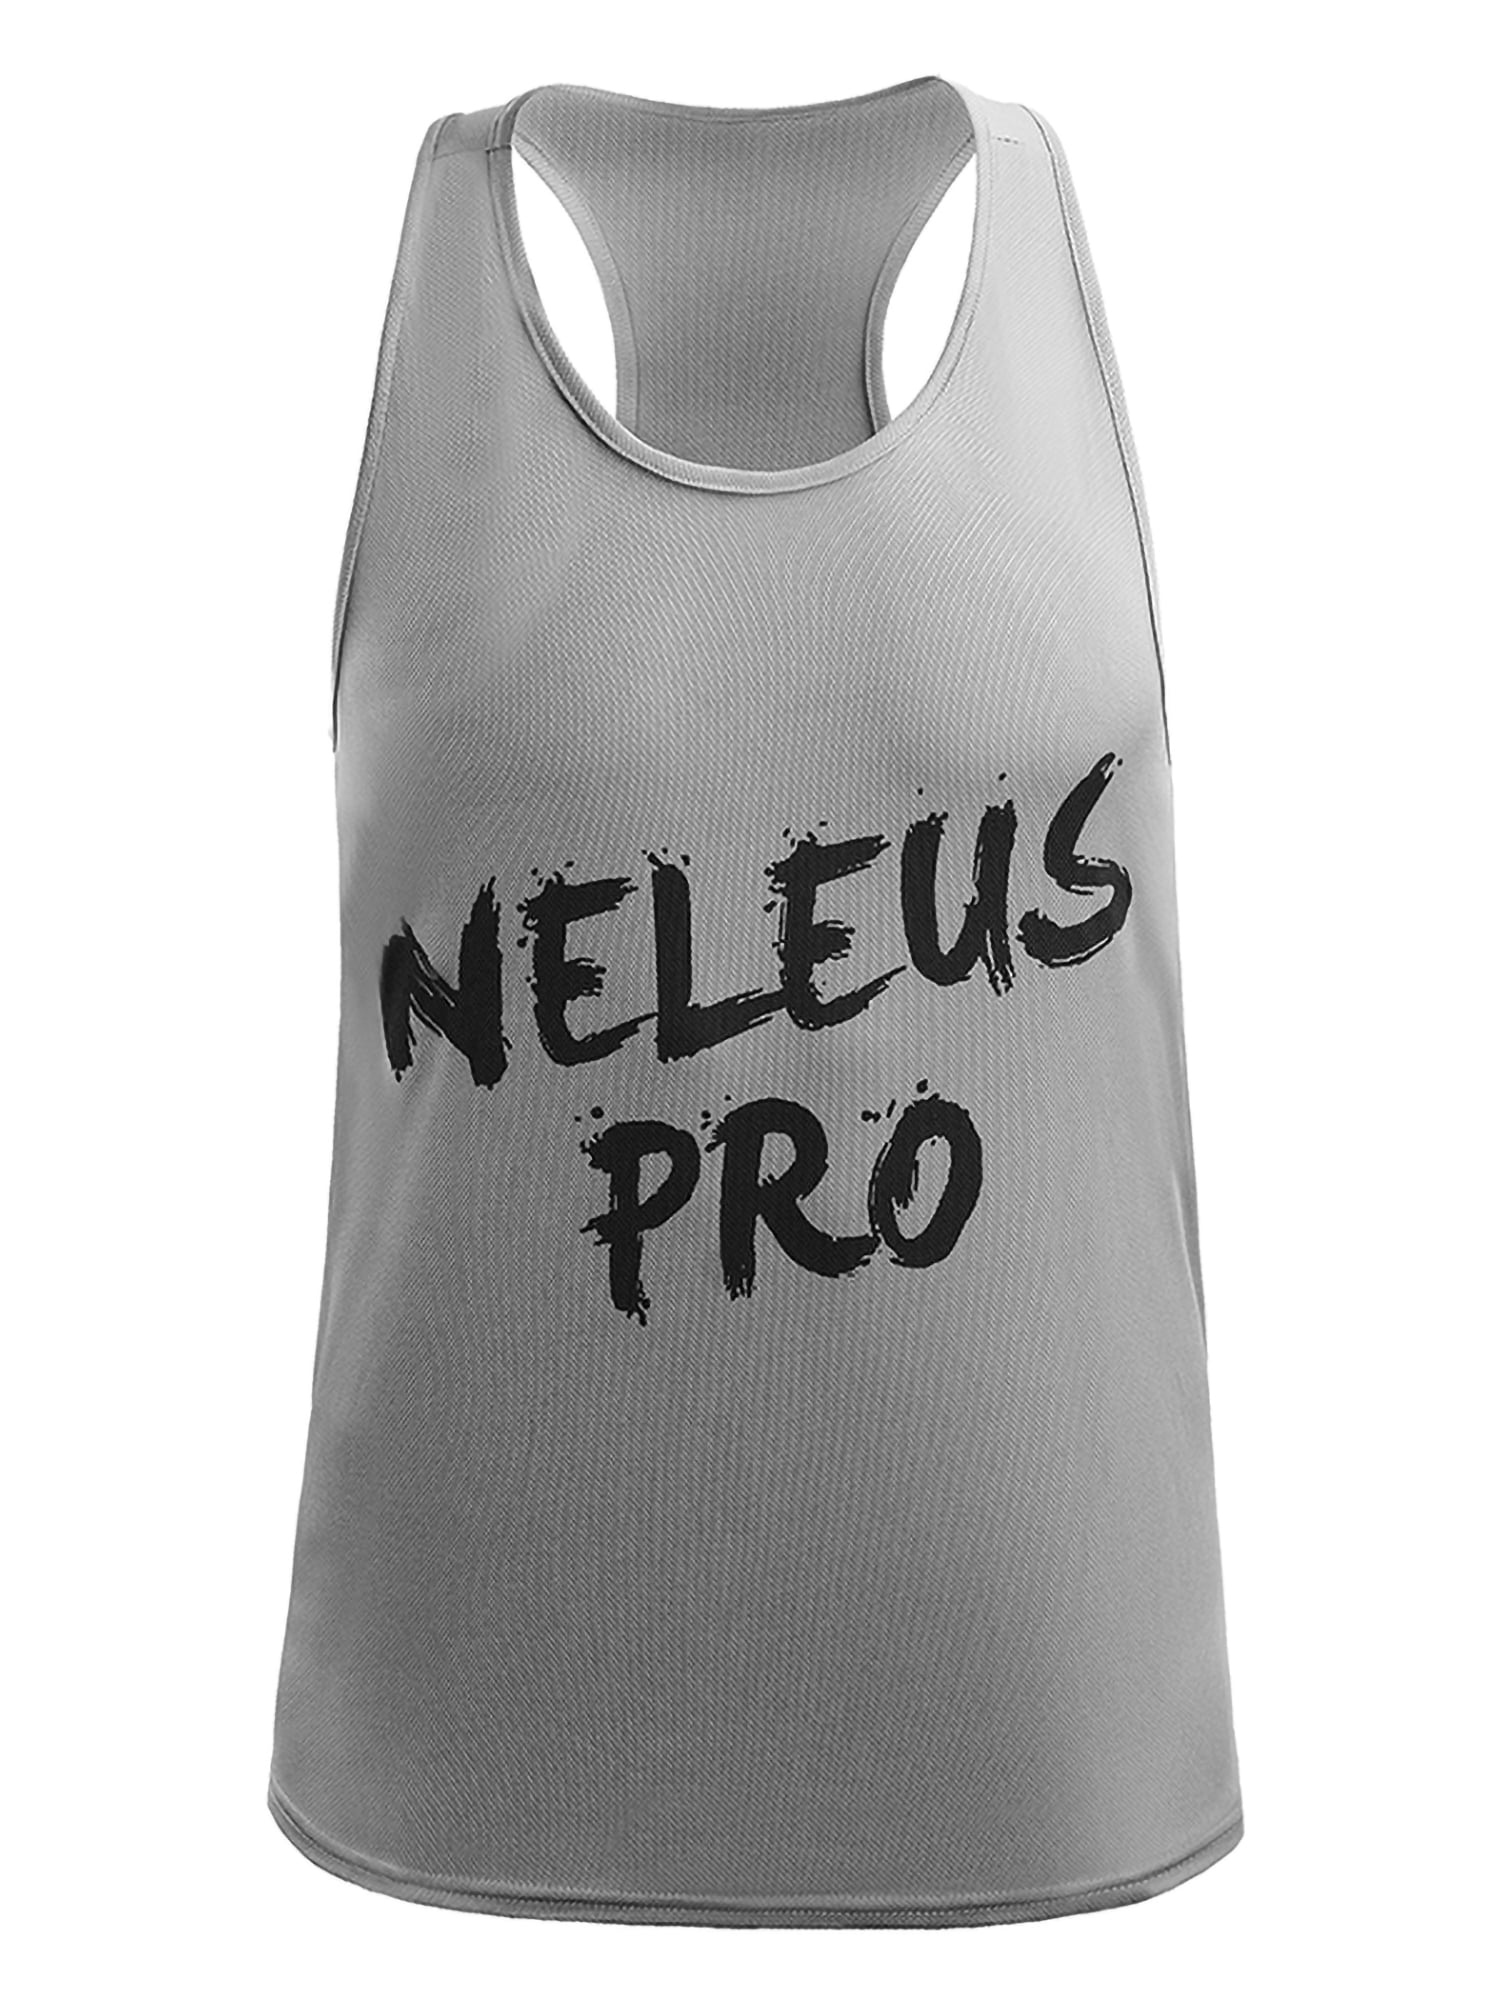 Details about   Neleus Men's Dry Fit Workout Running Muscle Tank Top 